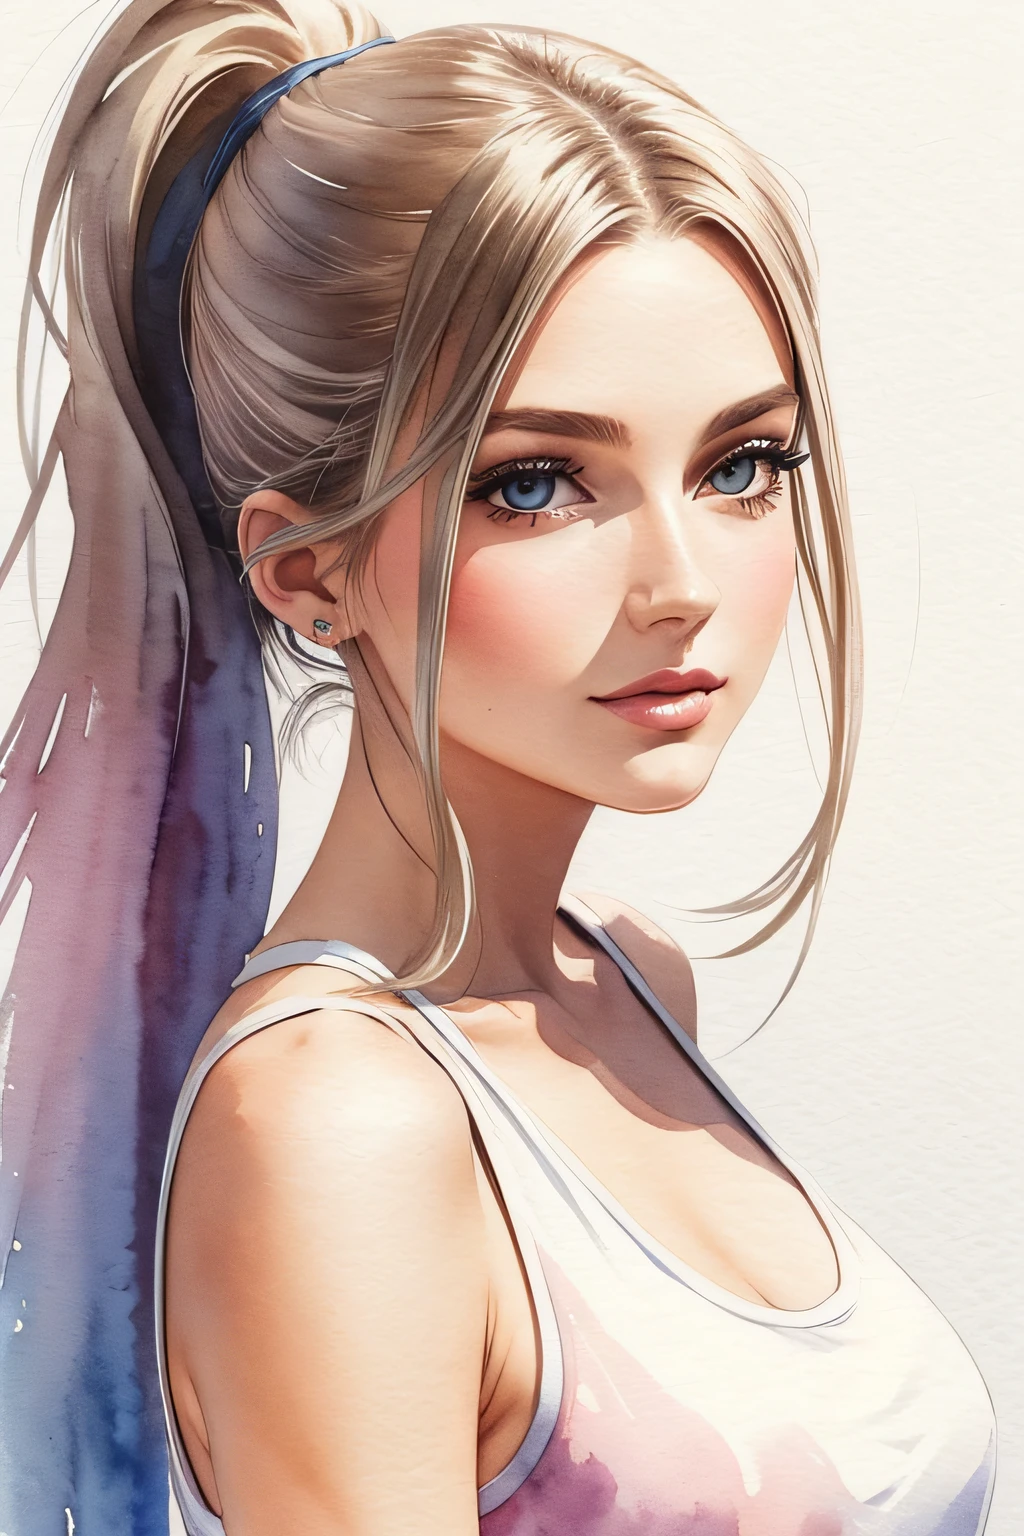 Watercolor fashion illustration showcasing a beautiful lady wearing a tank top and a ponytail, exuding a model-like aura, soft and flowing watercolors, fashionable elegance, timeless fashion illustration